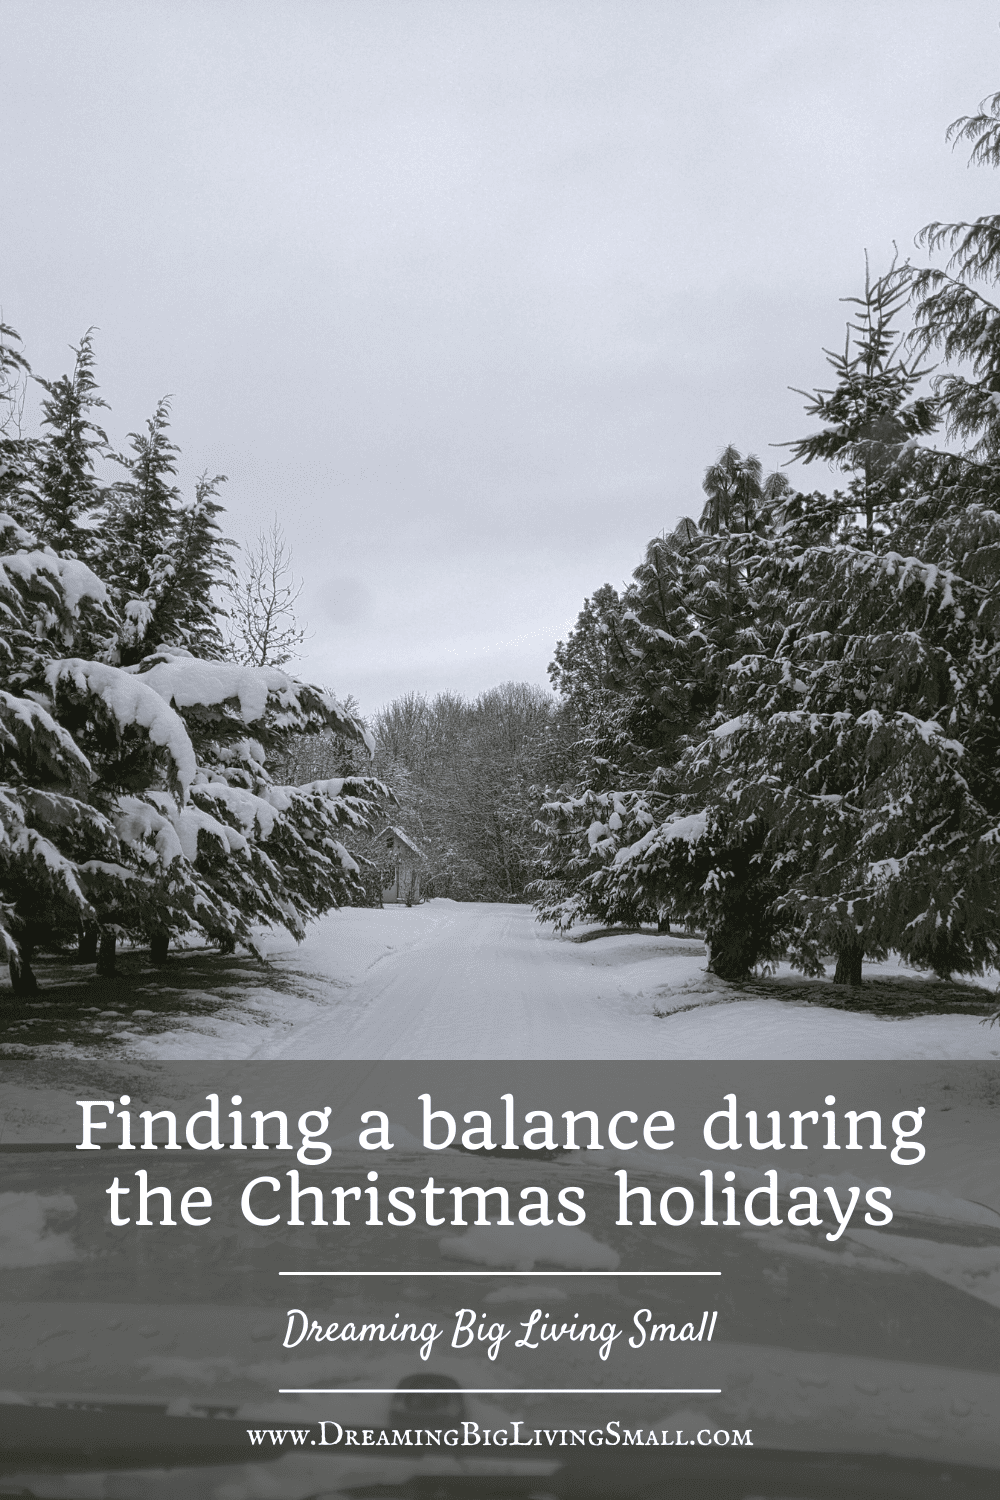 Finding a balance during the Christmas holidays